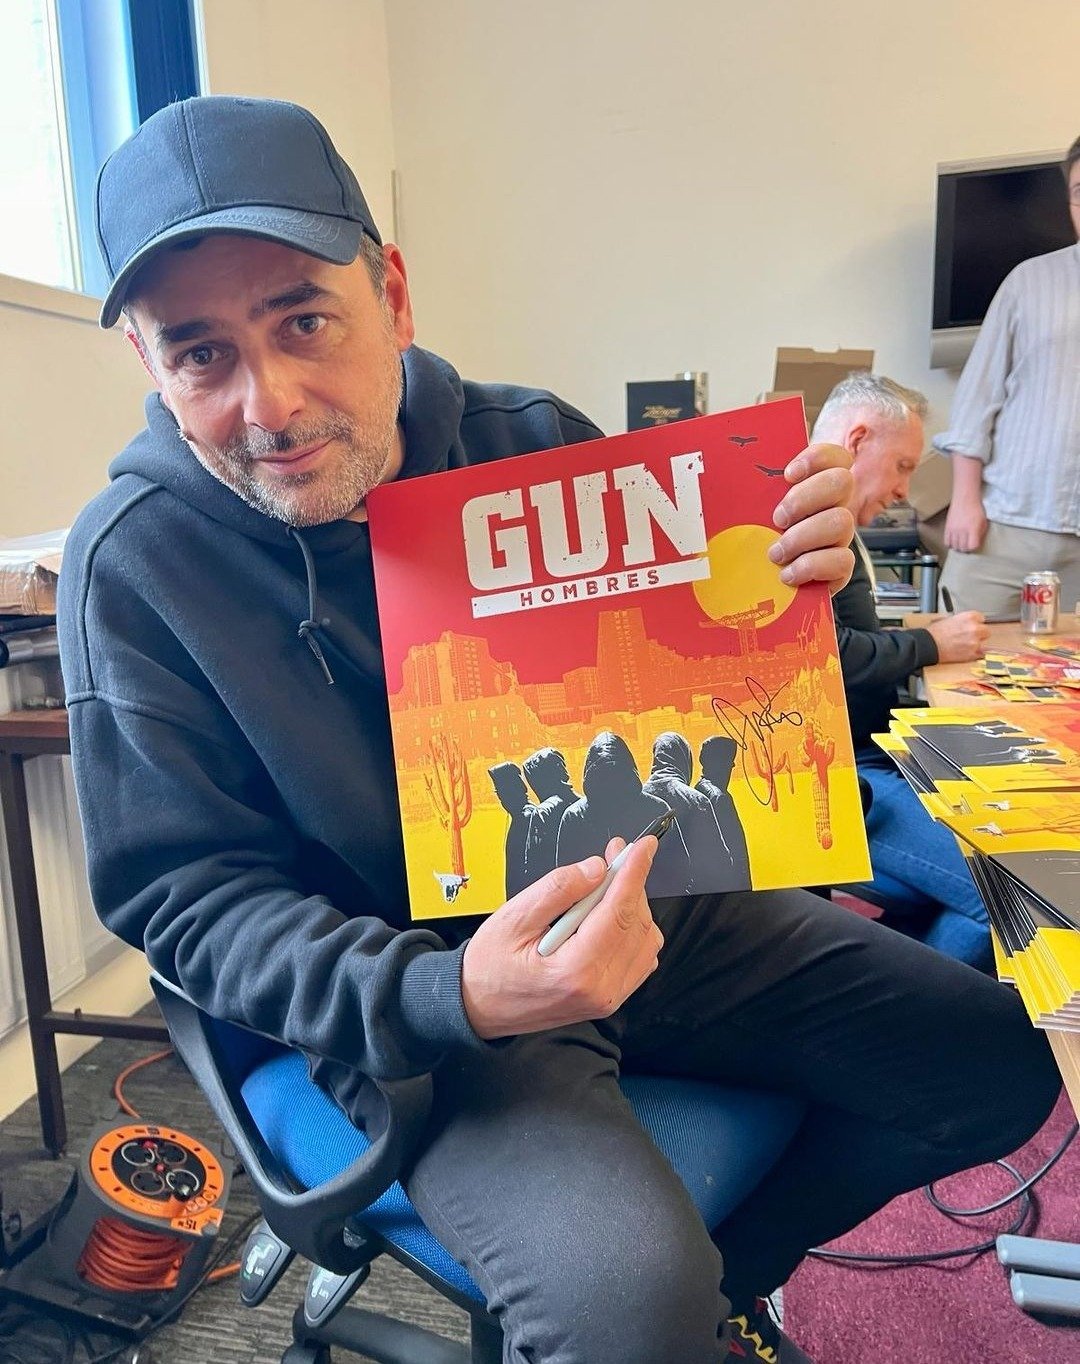 Congrats to Scottish rock band @gunofficialuk for getting their new album 'Hombres' at #7 in the midweek @officialcharts UK. This is on track to be their highest charting album in 30 years. Get your copy from the Official Store, Amazon or wherever yo